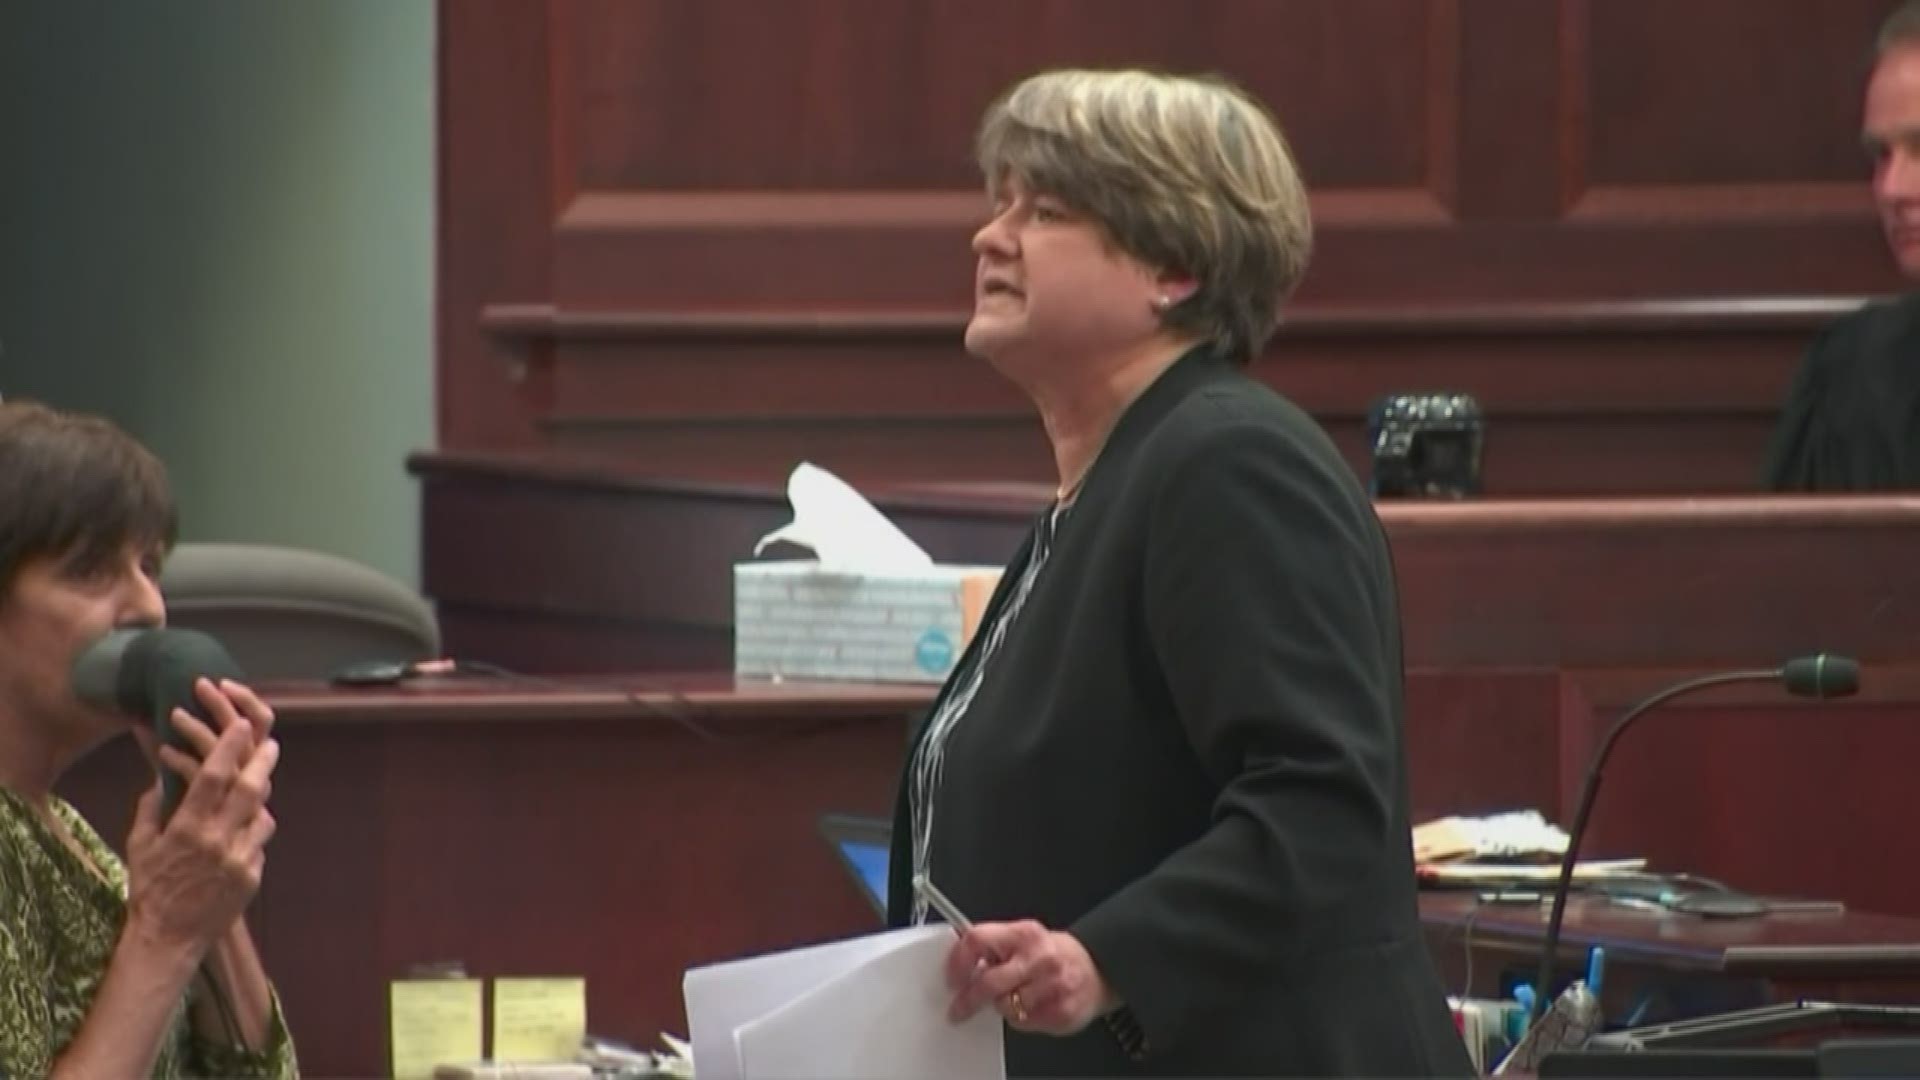 Defense attorney Corinne Mull presents her closing statement in the Murder Trial of Jennifer and Joseph Rosenbaum on July 26, 2019. They are accused of killing their foster daughter, 2-year-old Laila Daniel.